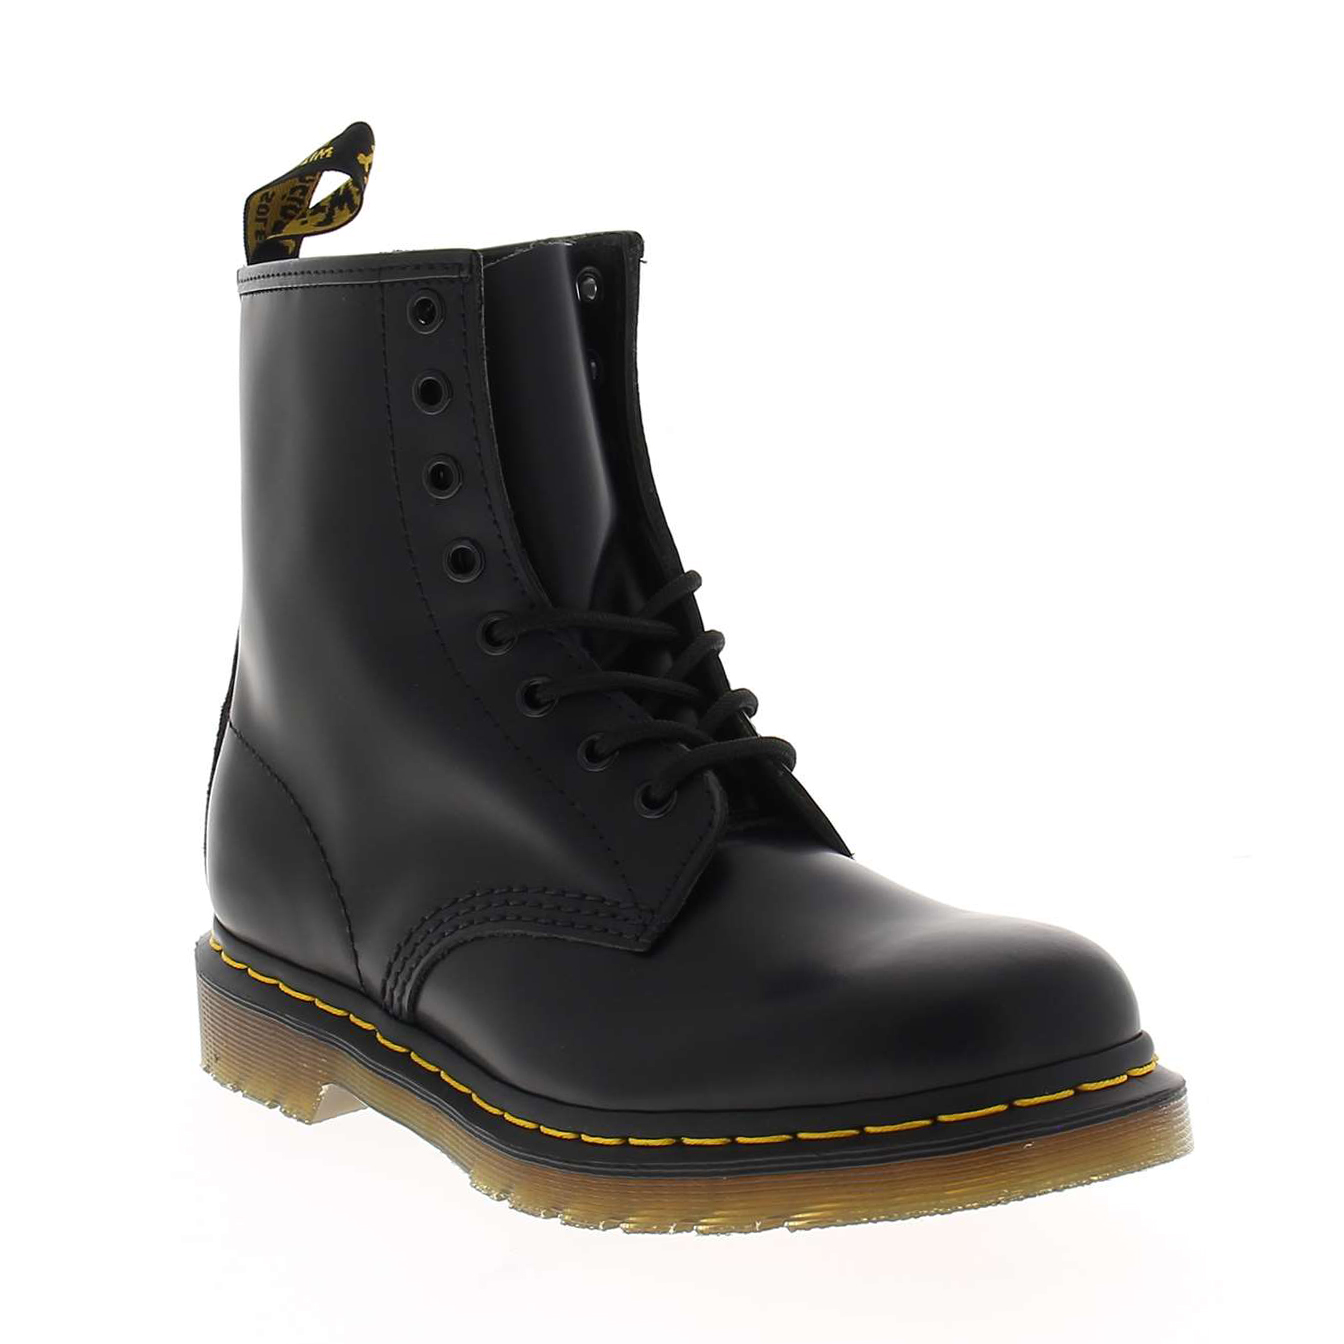 01 - 1460 SMOOTH -  - Boots et bottines - Cuir